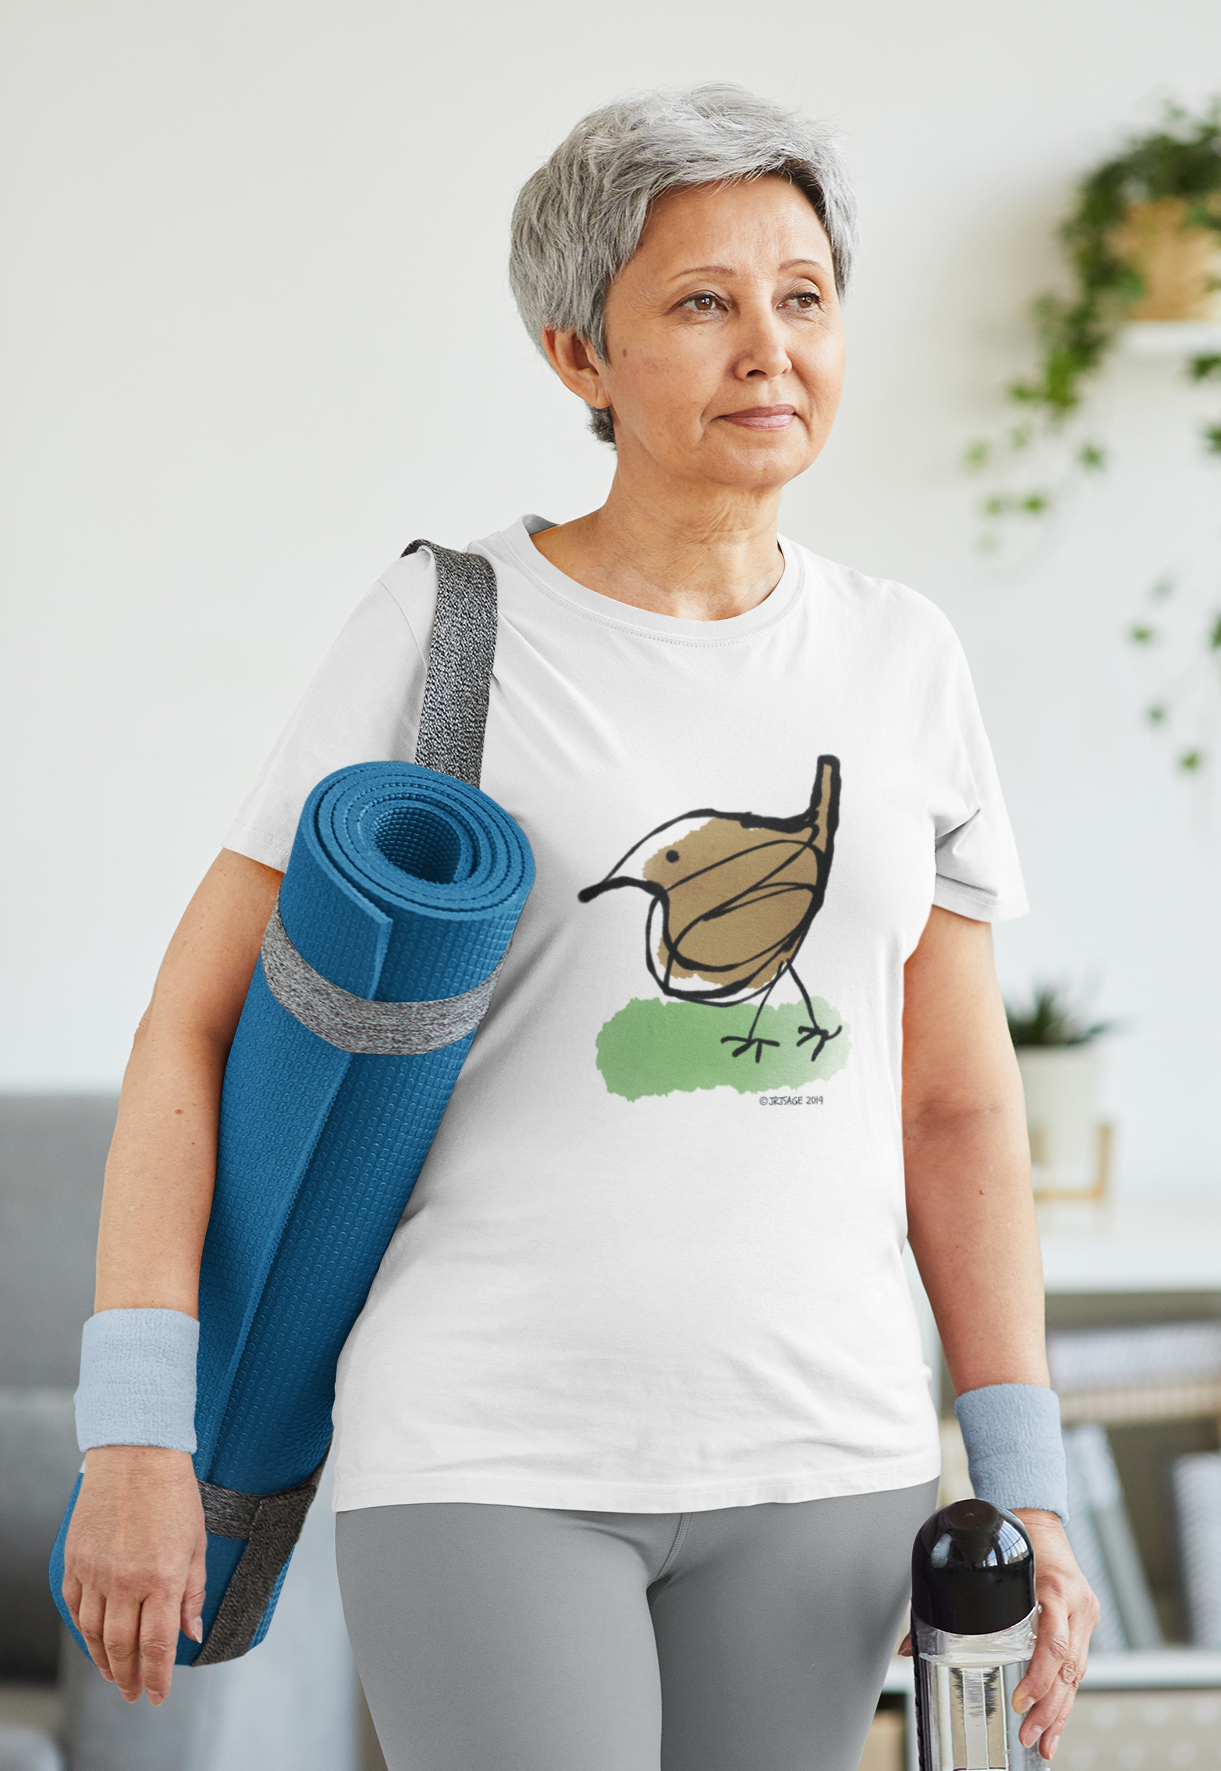 Yoga woman wearing a cotton t-shirt with a printed hand drawn cute jenny wren bird design by hector and bone